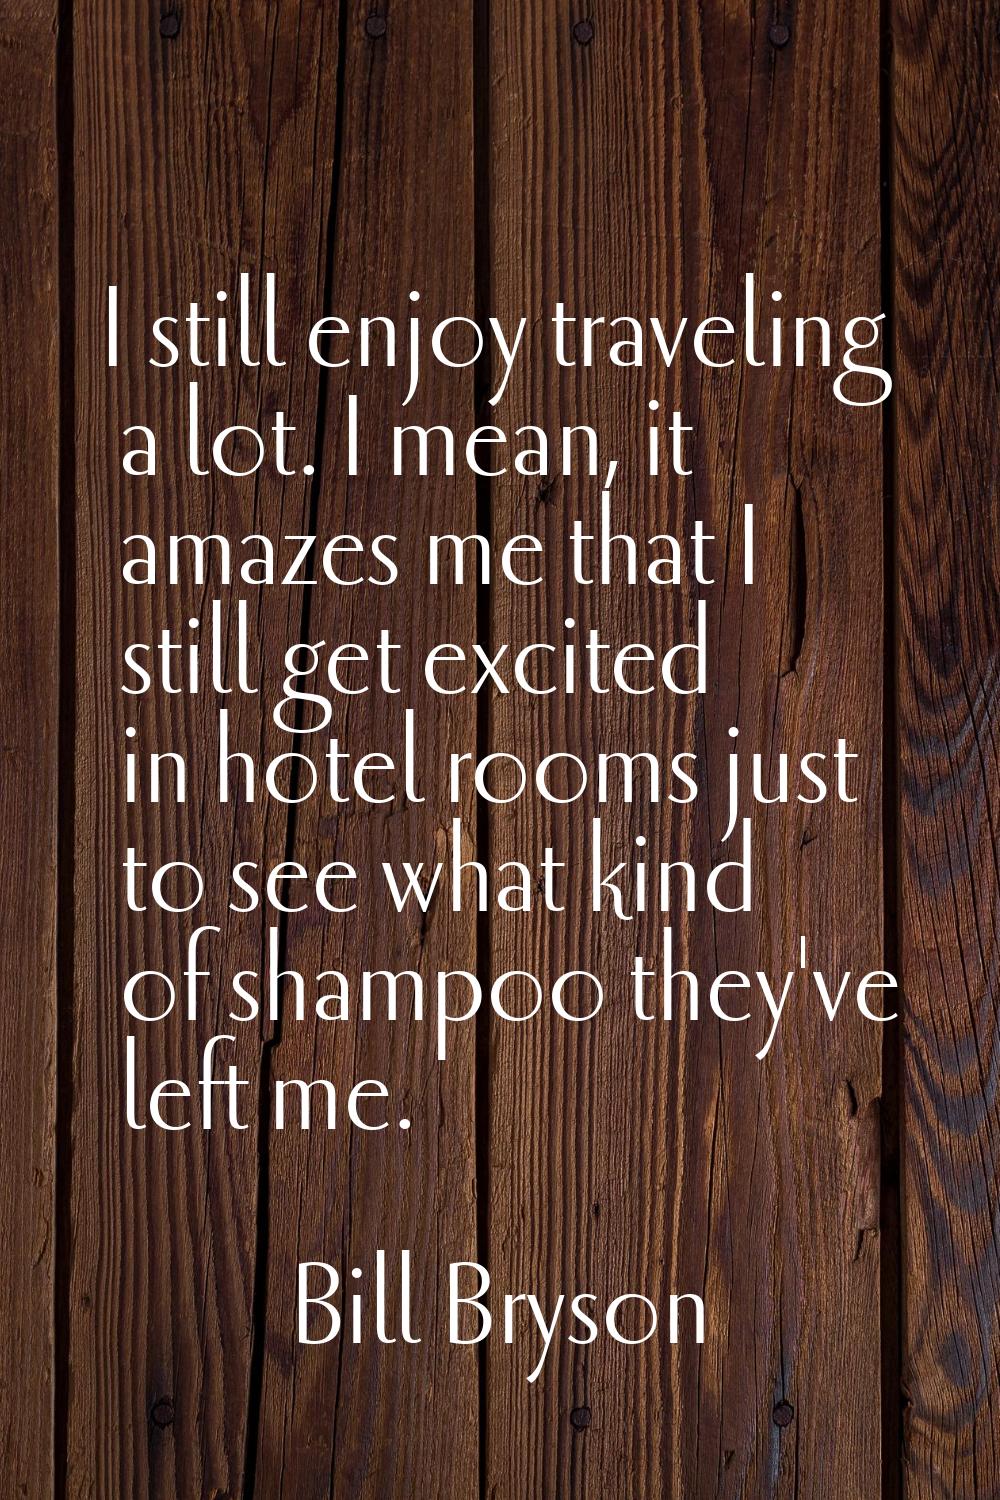 I still enjoy traveling a lot. I mean, it amazes me that I still get excited in hotel rooms just to